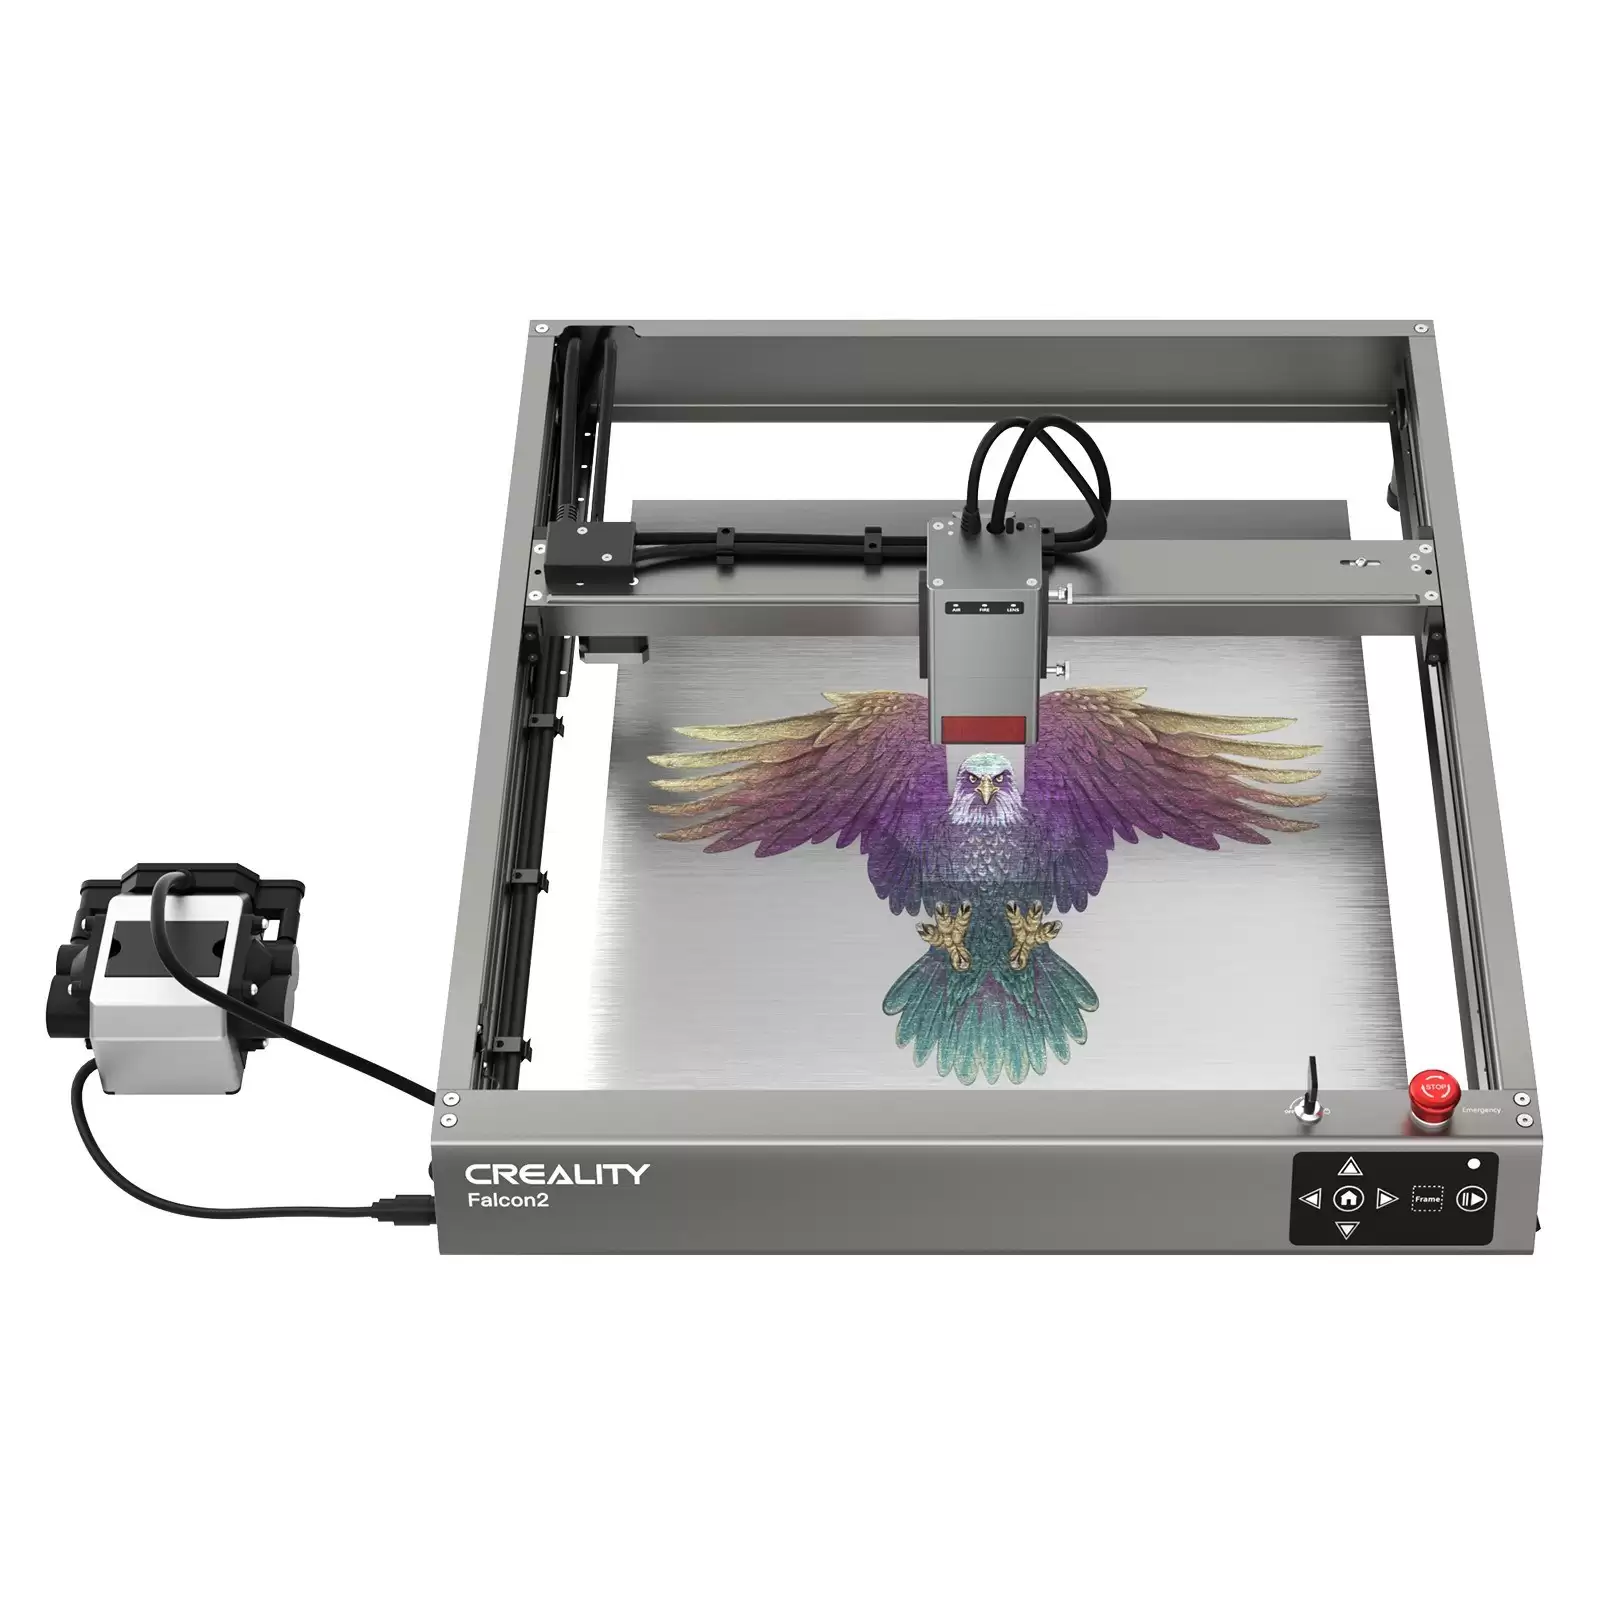 Order In Jus T$569creality Falcon2 22w Laser Engraver 400x415mm Engraving Area With This Discount Coupon At Tomtop